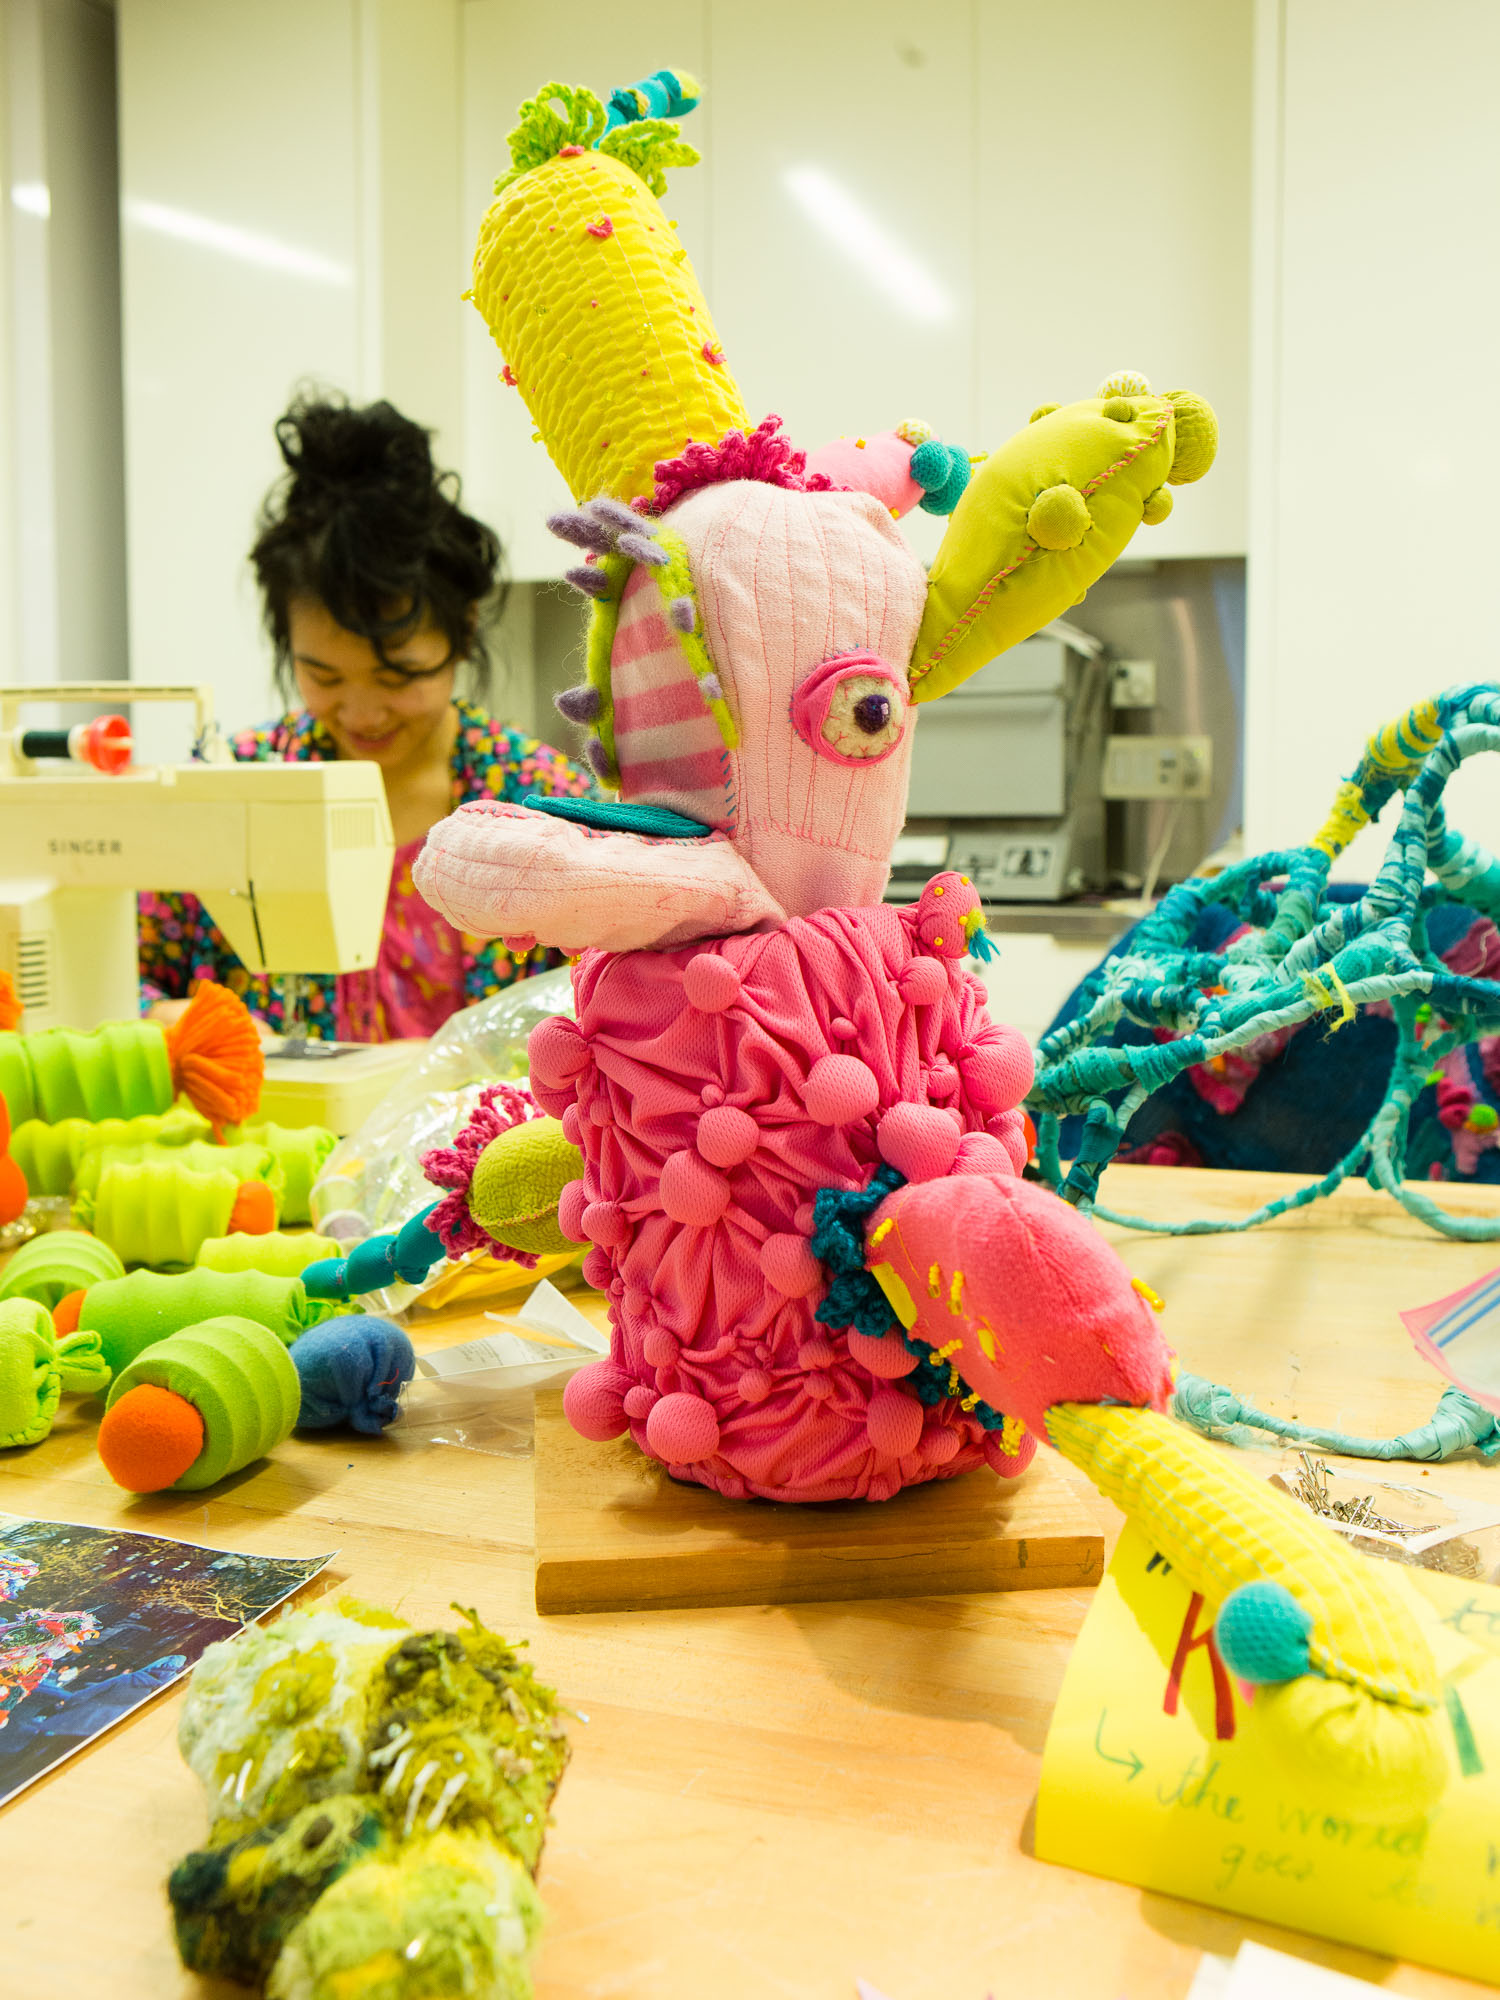 Artist Lexy Ho-Tai at work on her fabric constructions in an open studio in the Museum of Arts and Design.